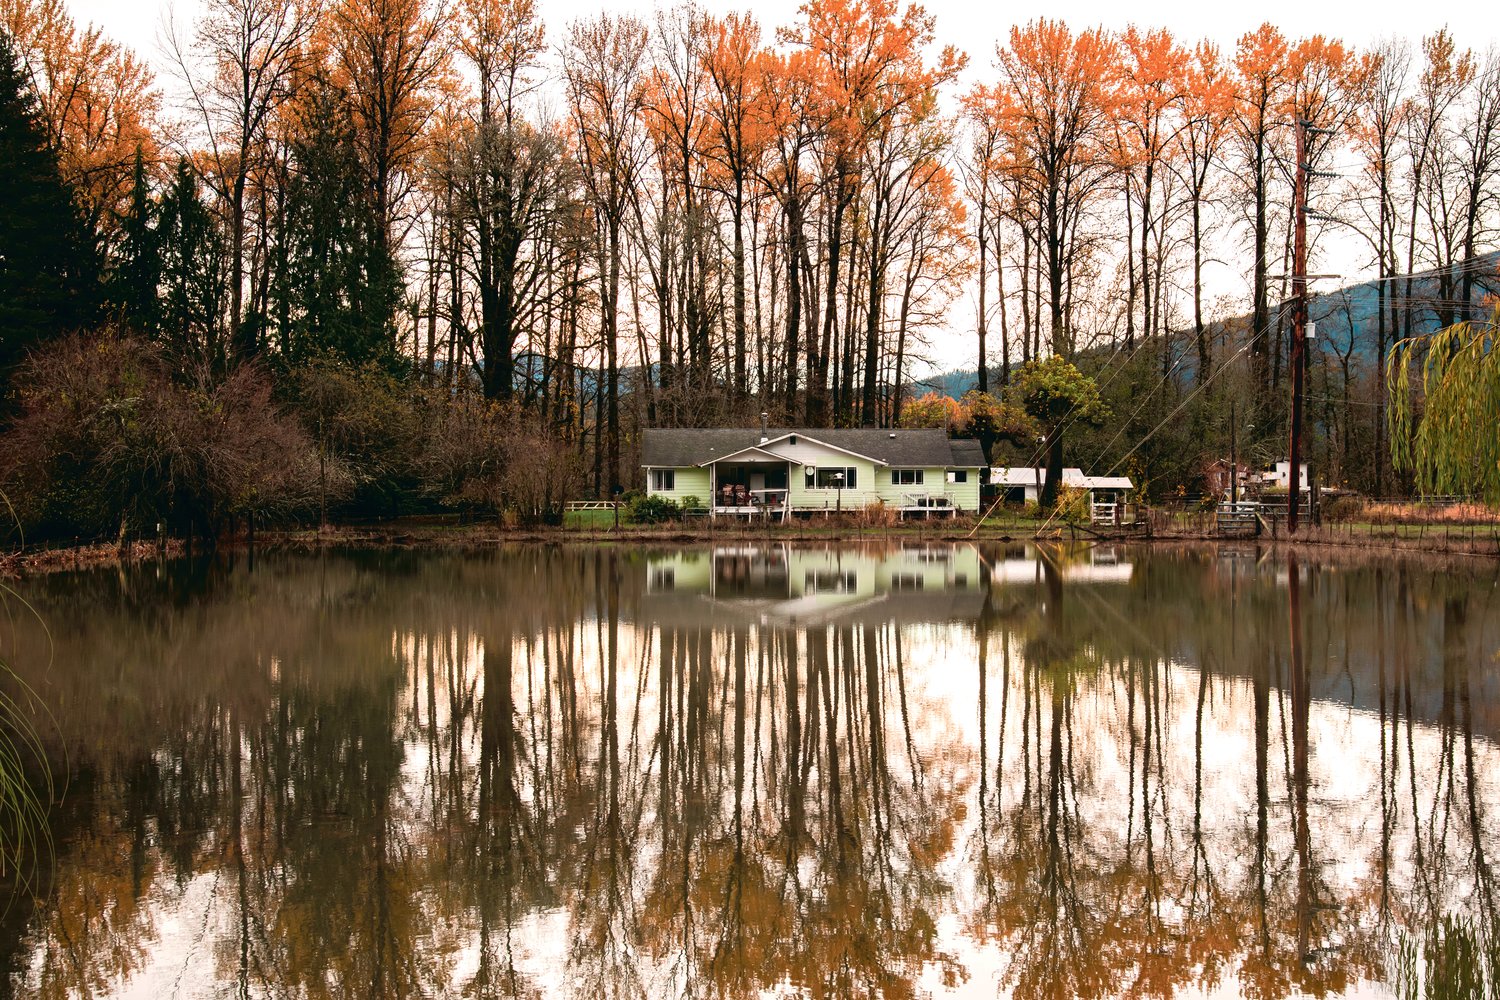 The reflection of a home and trees is seen in floodwaters as the Cowlitz River recedes Saturday in Randle.